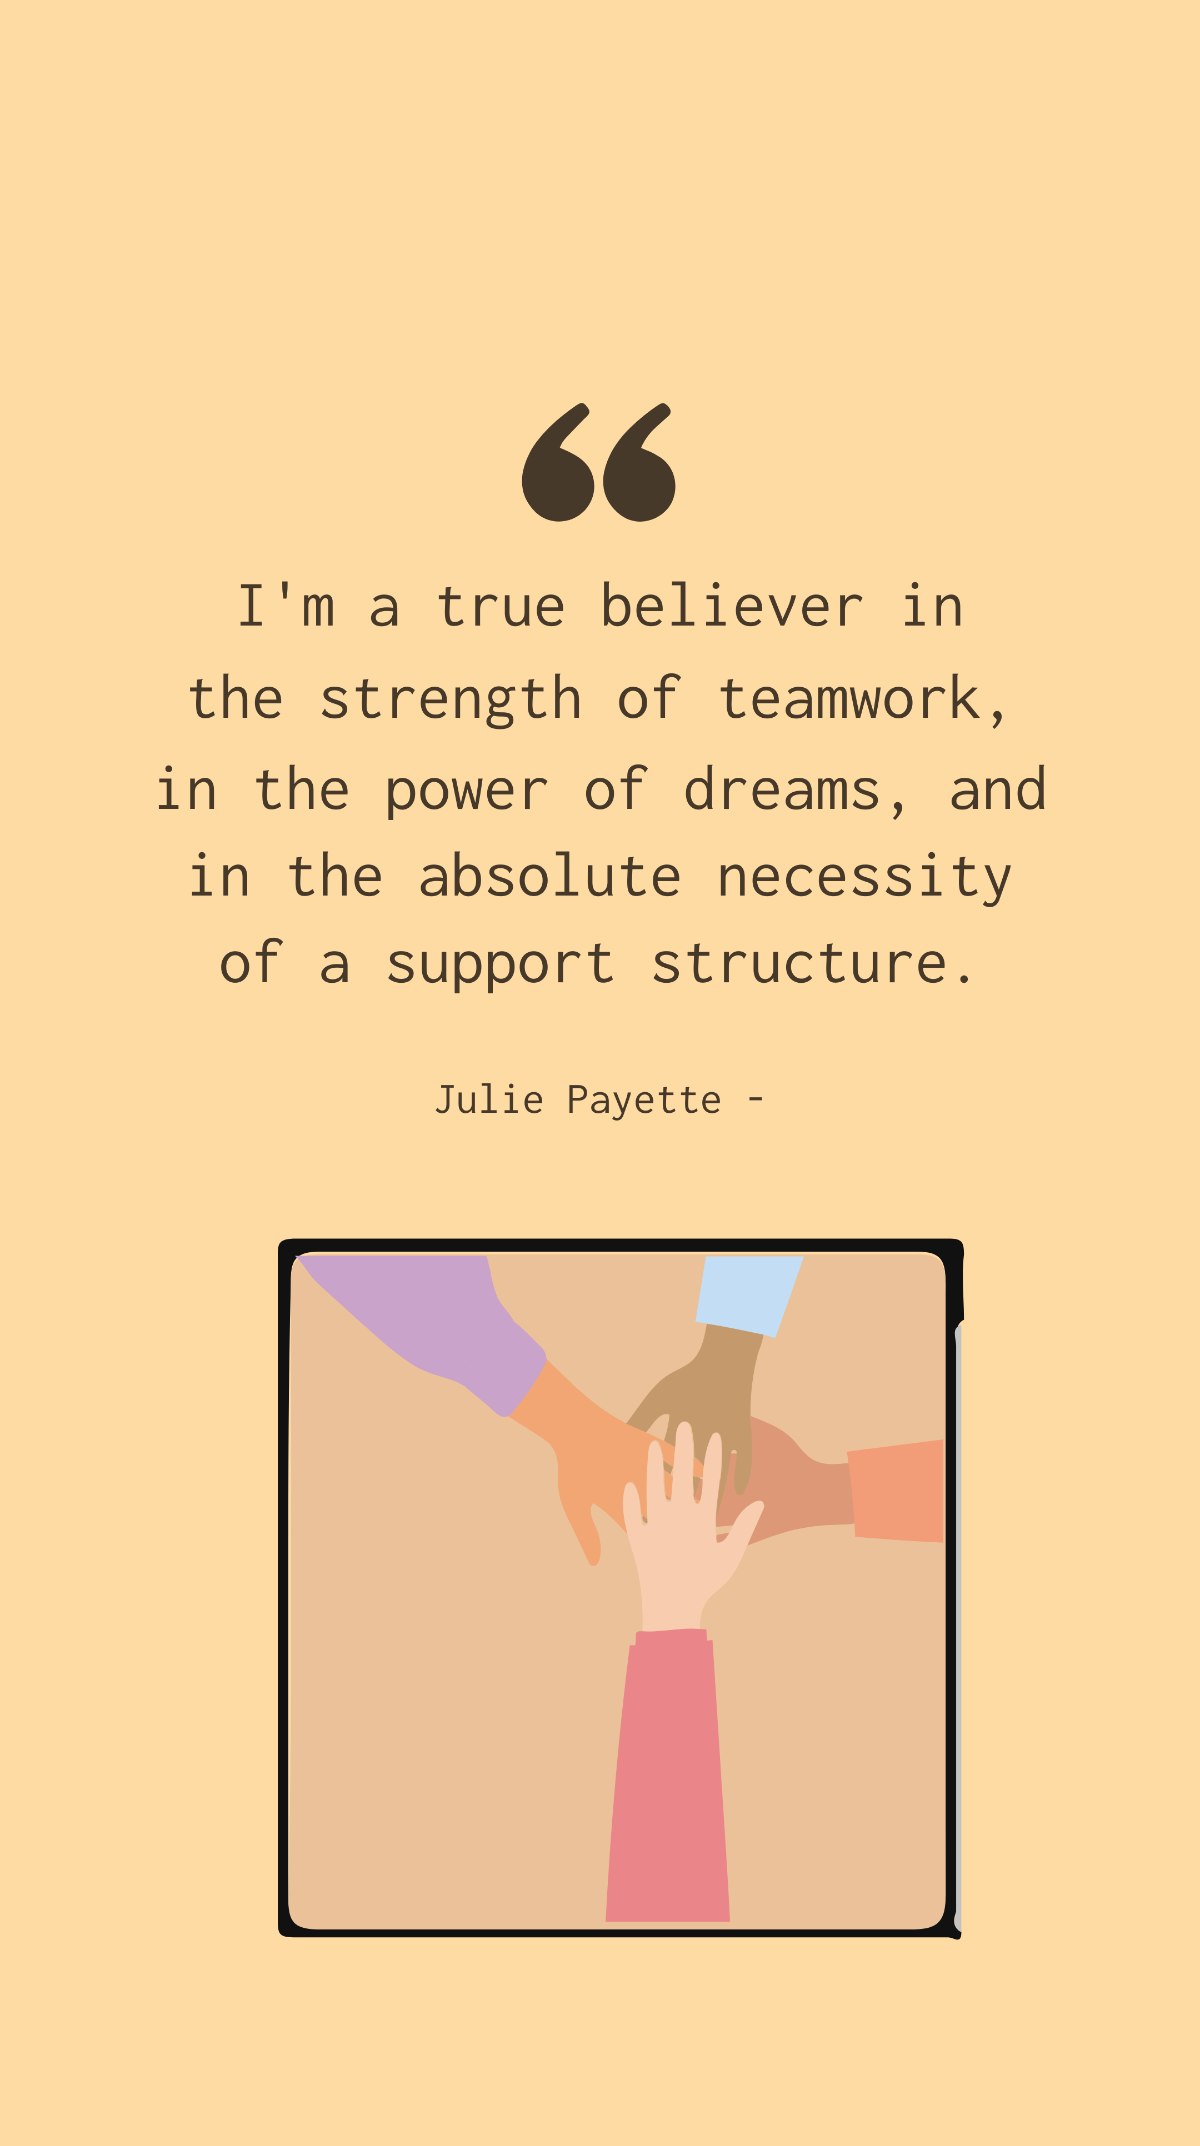 Julie Payette - I'm a true believer in the strength of teamwork, in the power of dreams, and in the absolute necessity of a support structure.